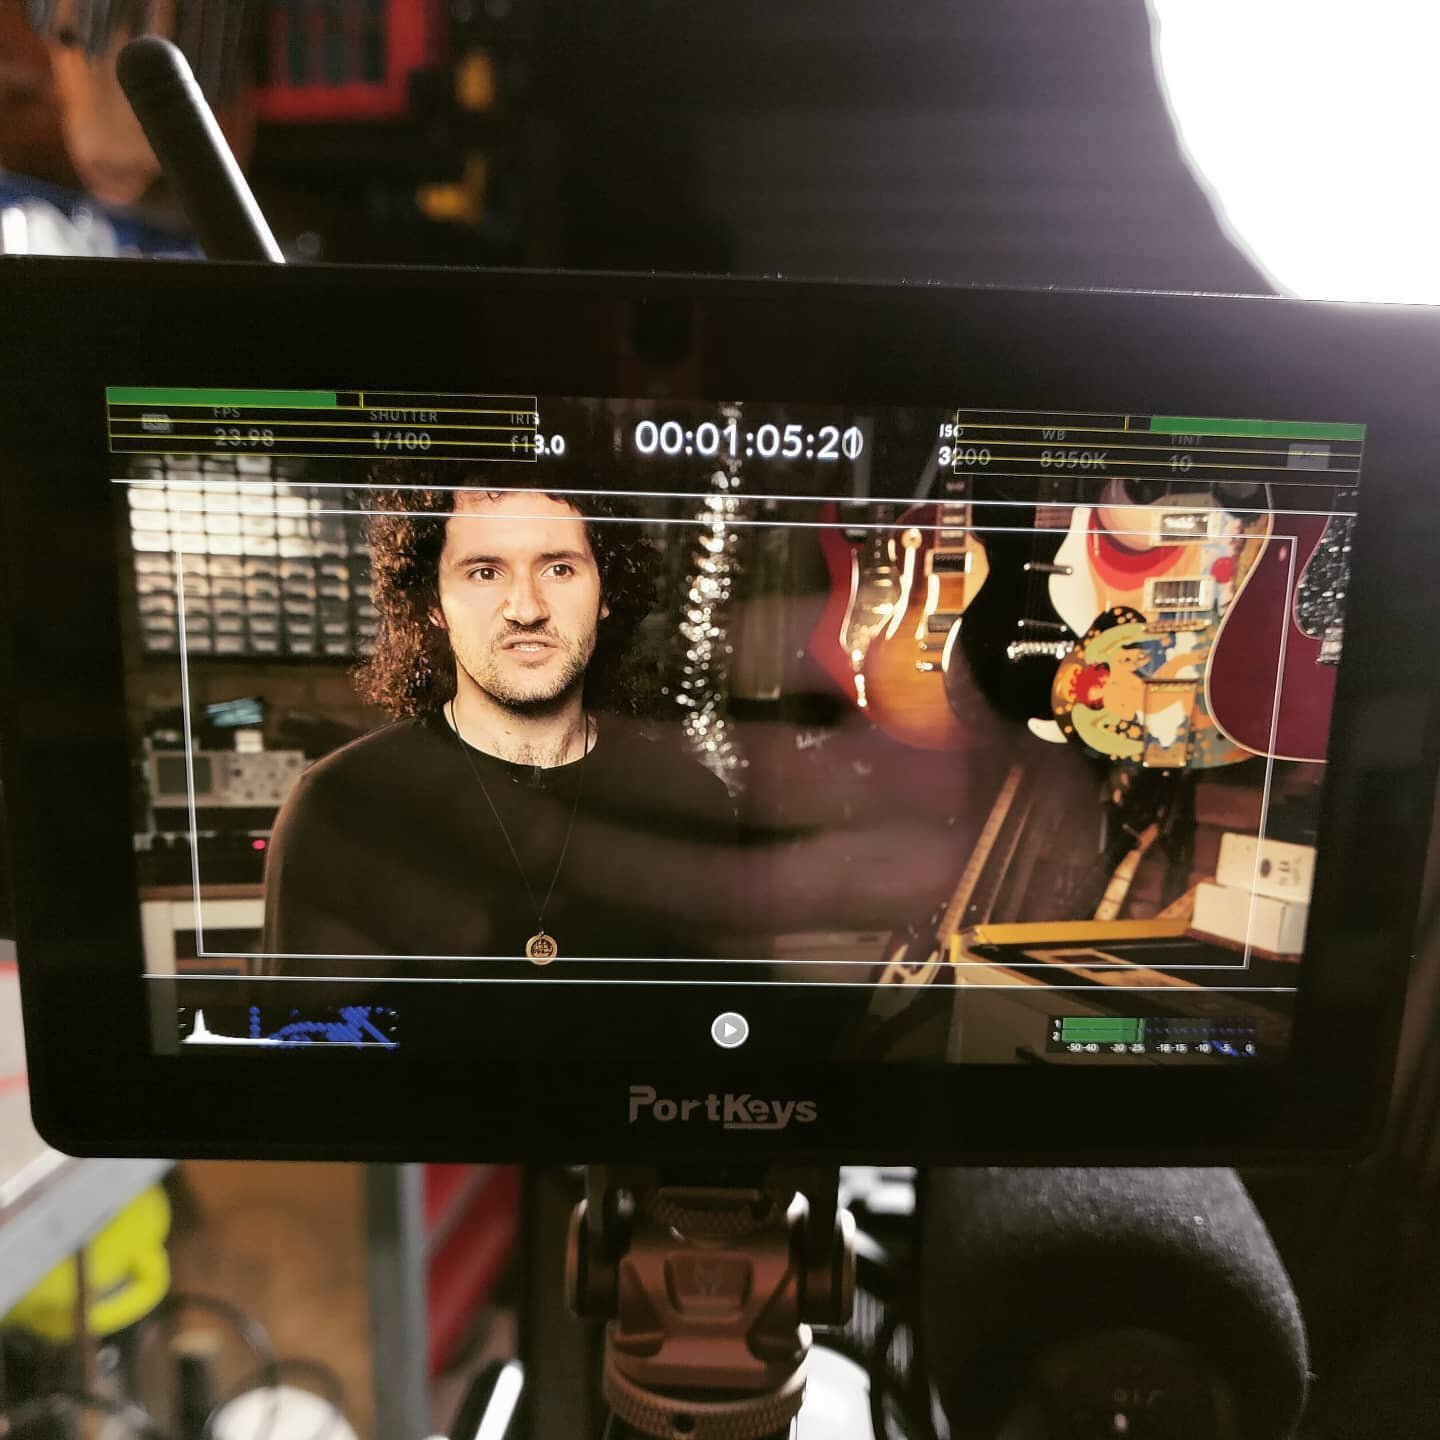 Got some really exciting things in the works at the moment ✌️
.
🎥 @hitmeupcreative
.
#weztech #videoproduction #camera #guitars #guitar #guitarshop #smallbusiness #soletrader  #familybusiness #lifestory #storytime #music #industry #musicindustry #gu